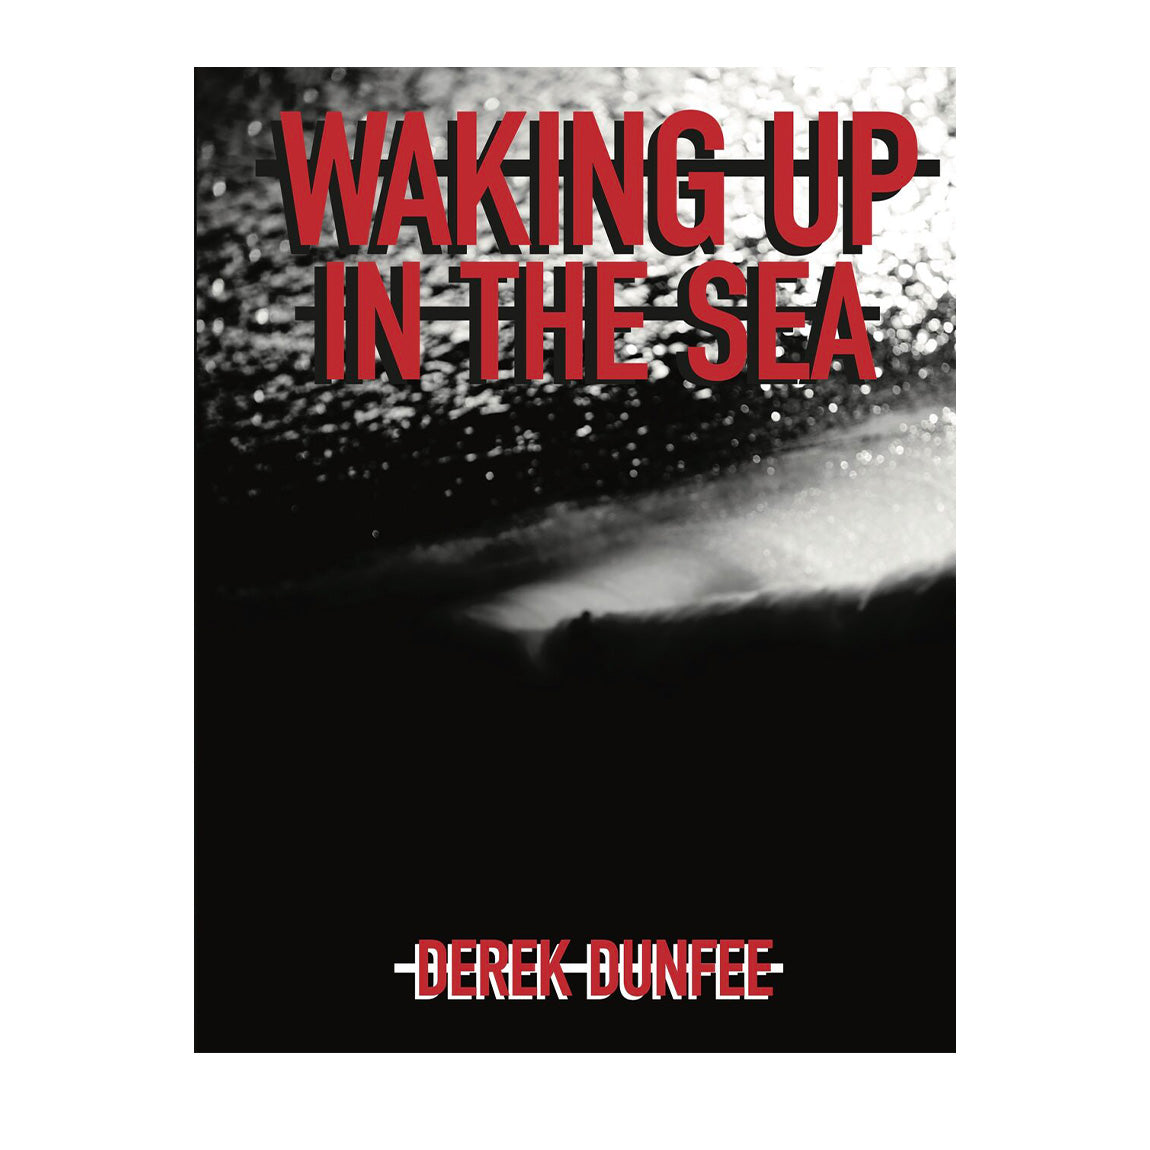 WAKING UP IN THE SEA BY DEREK DUNFEE